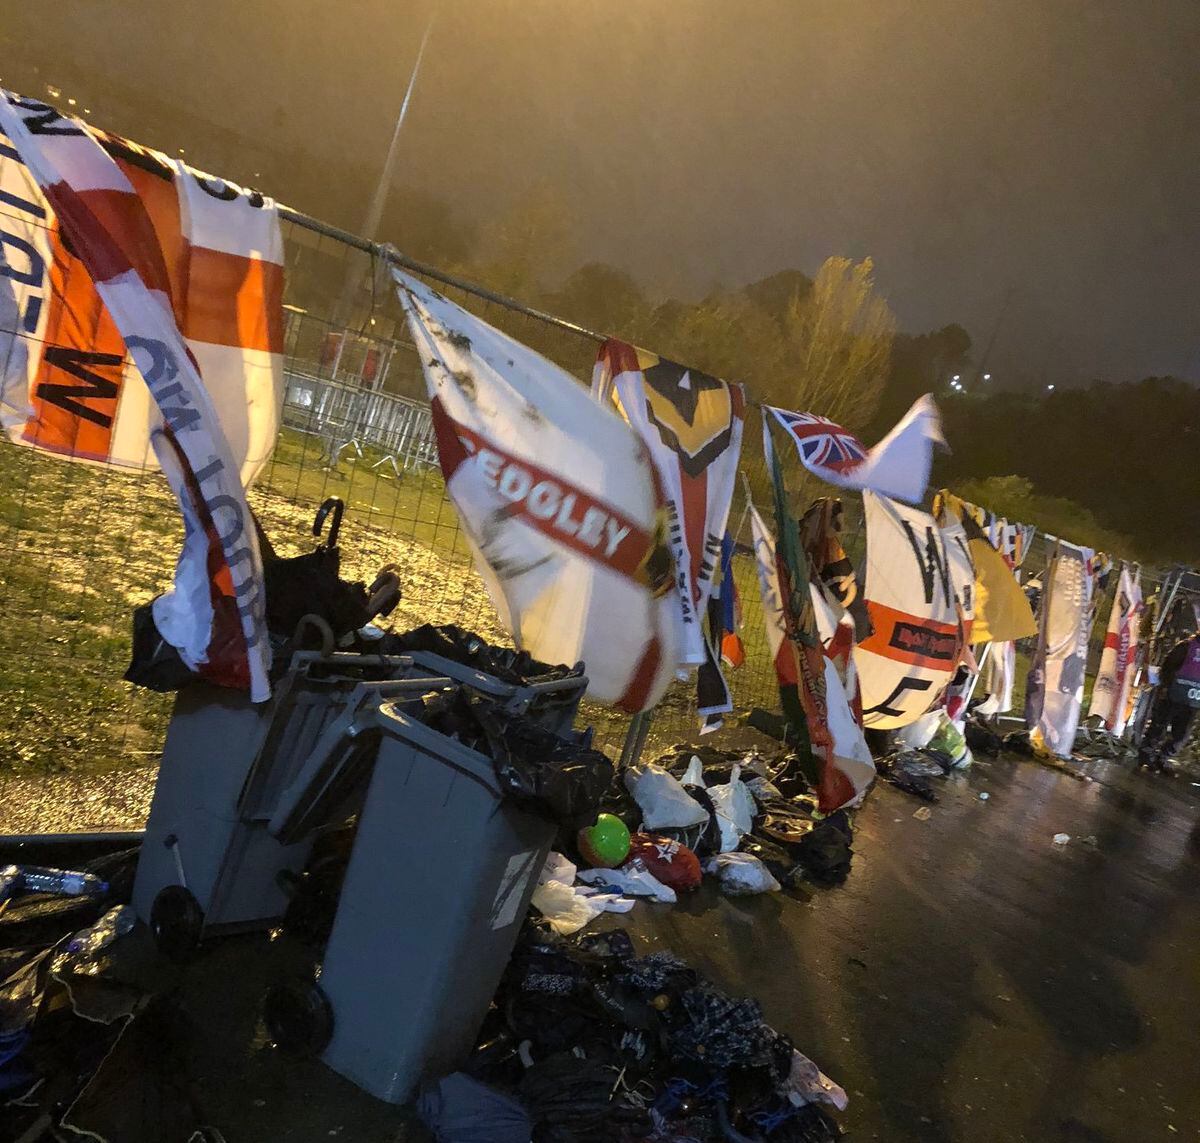 Wolves stewards hung up flags they retrieved from bins after they were confiscated by local security